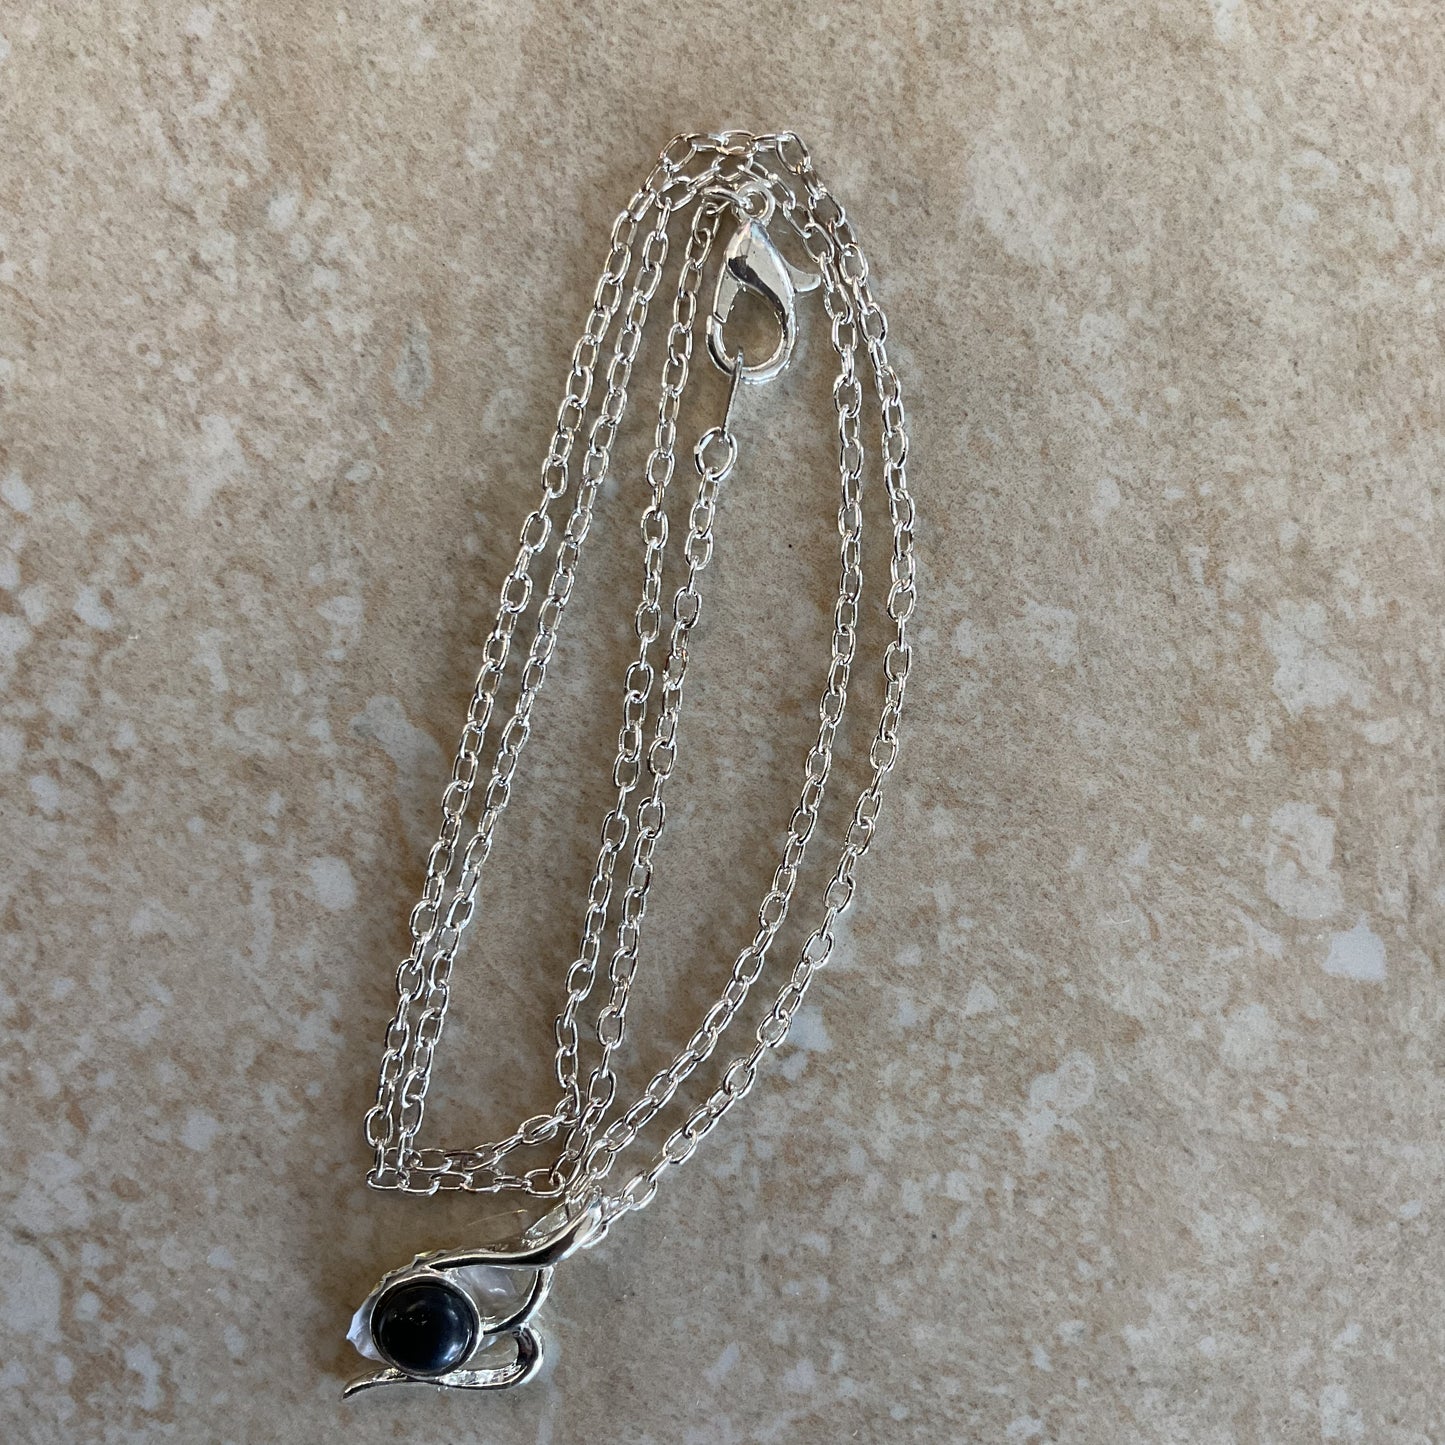 NWOT Silvertone And Black Classic Necklace.with Pendant